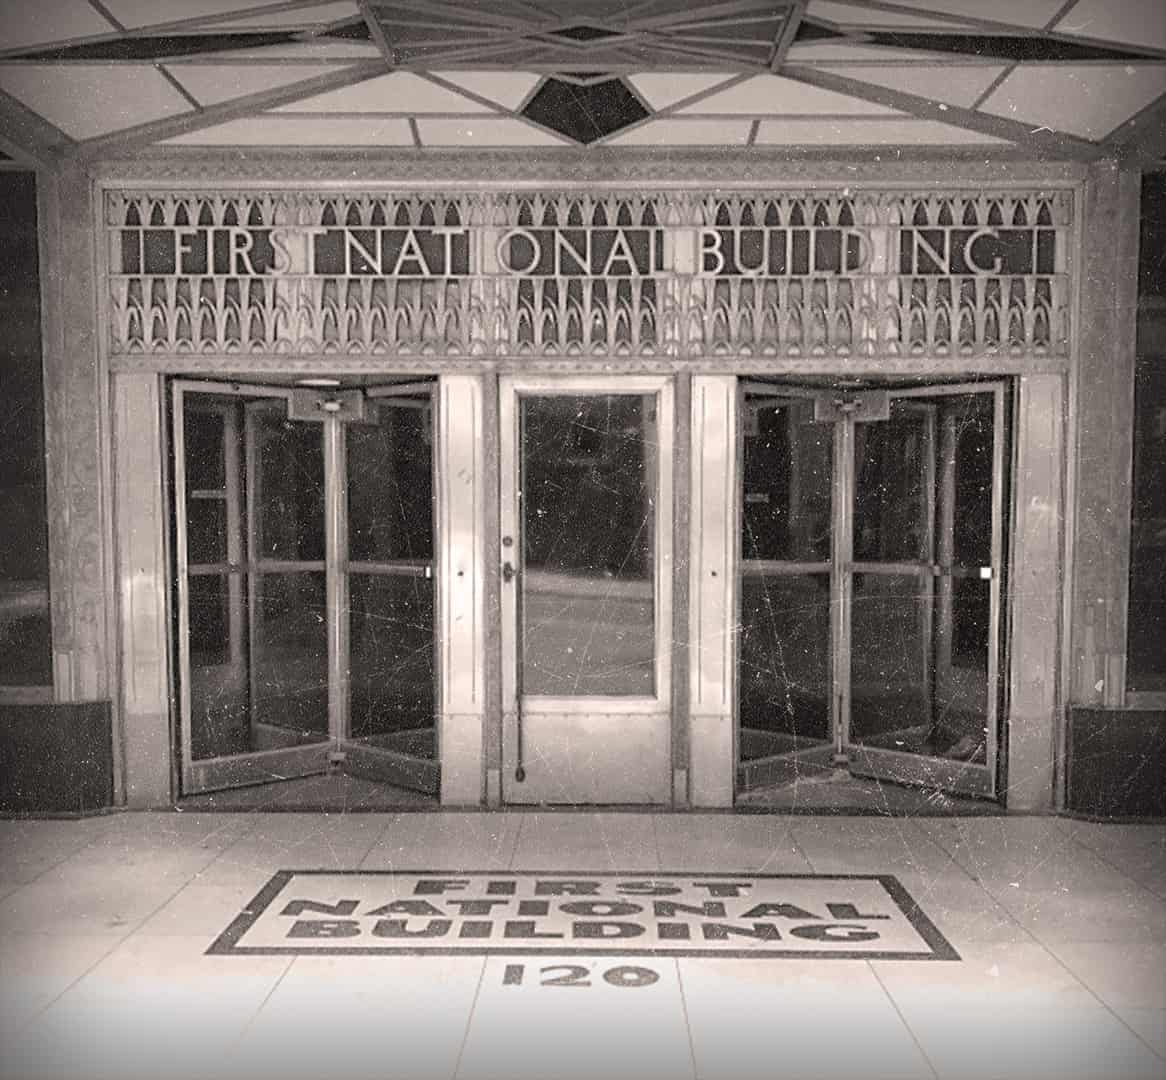 Photo of First National Building front entrance